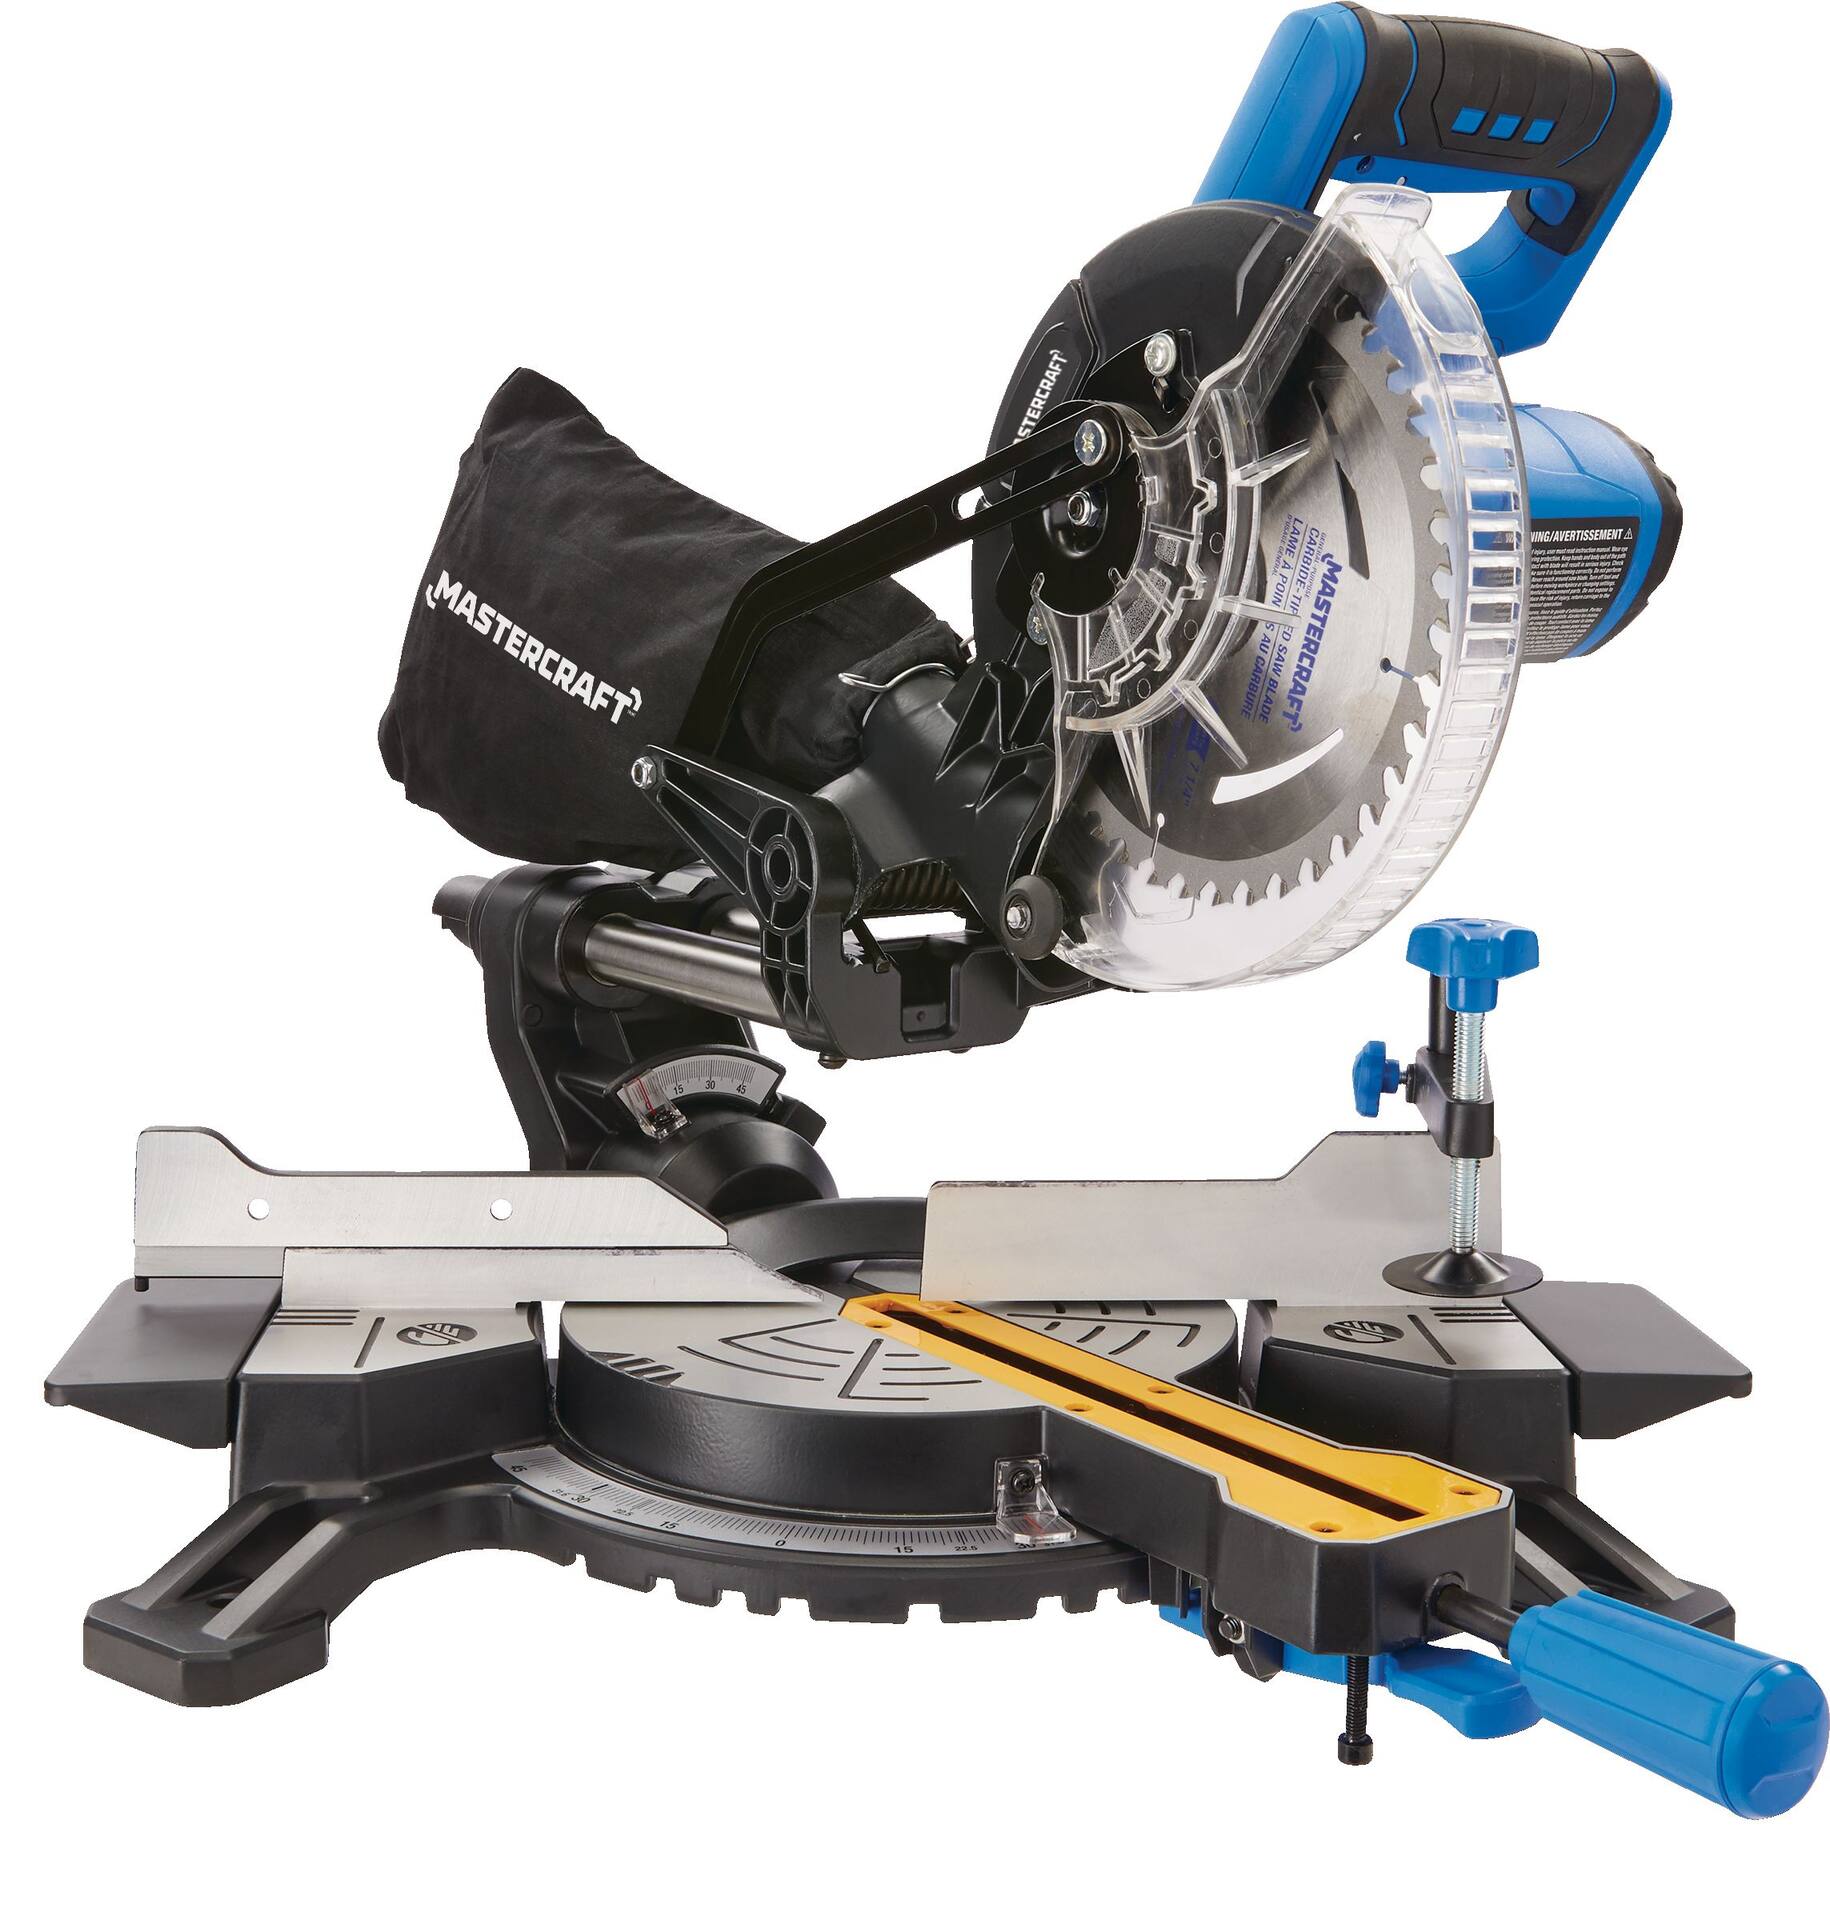 Mastercraft 20V Cordless 7-1/4-in Single-Bevel Sliding Mitre Saw, Tool Only  Canadian Tire